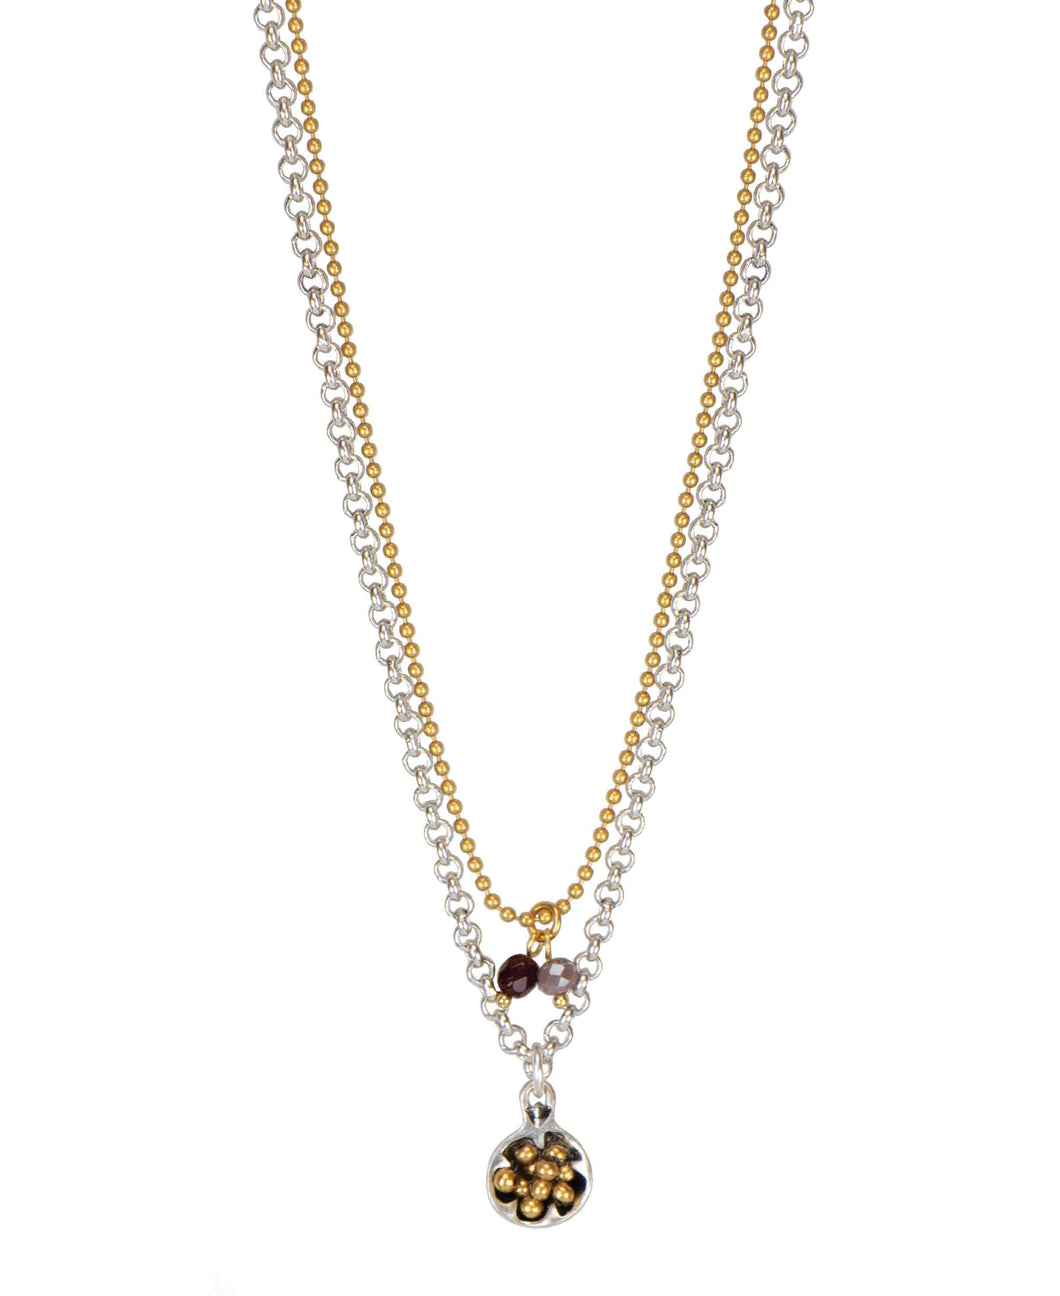 Hultquist Pomegranate Necklace